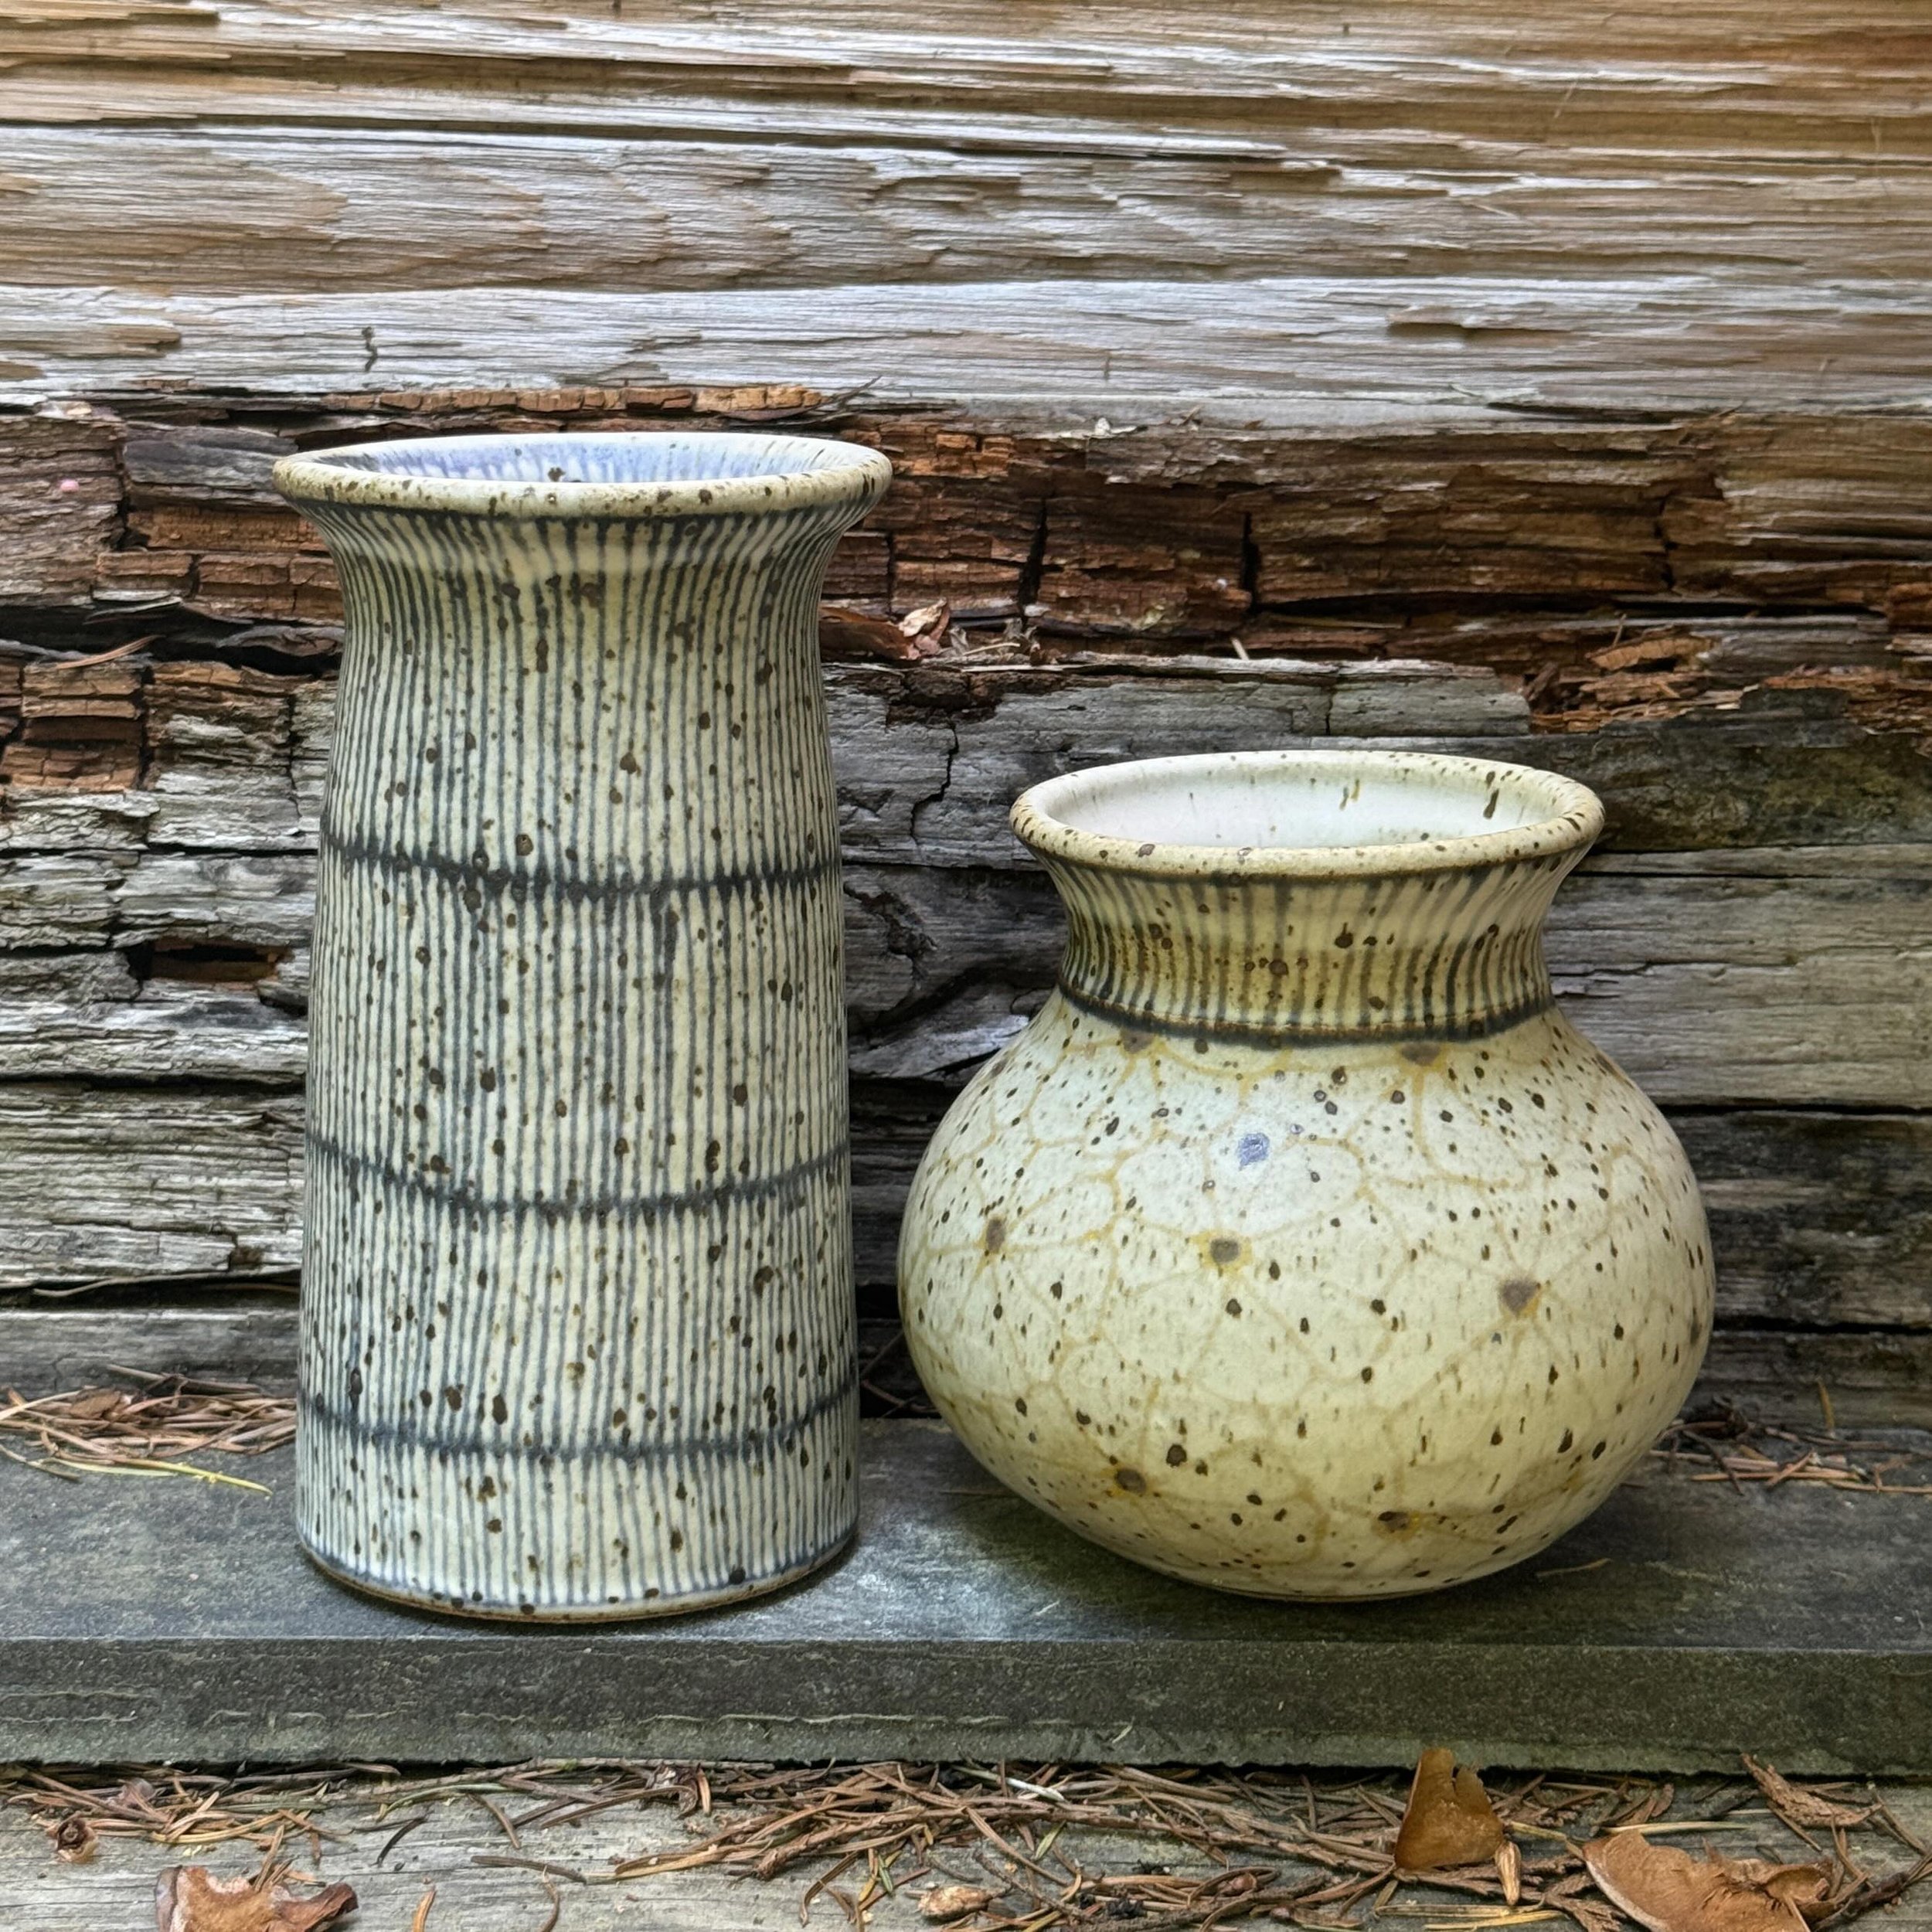 A couple vases that will be available in tomorrow&rsquo;s shop update (Tuesday, 4/23, 10AM Pacific). Looking forward to sharing this work 🌼 #vase #pottery #handmade #shopupdate #pnwpottery